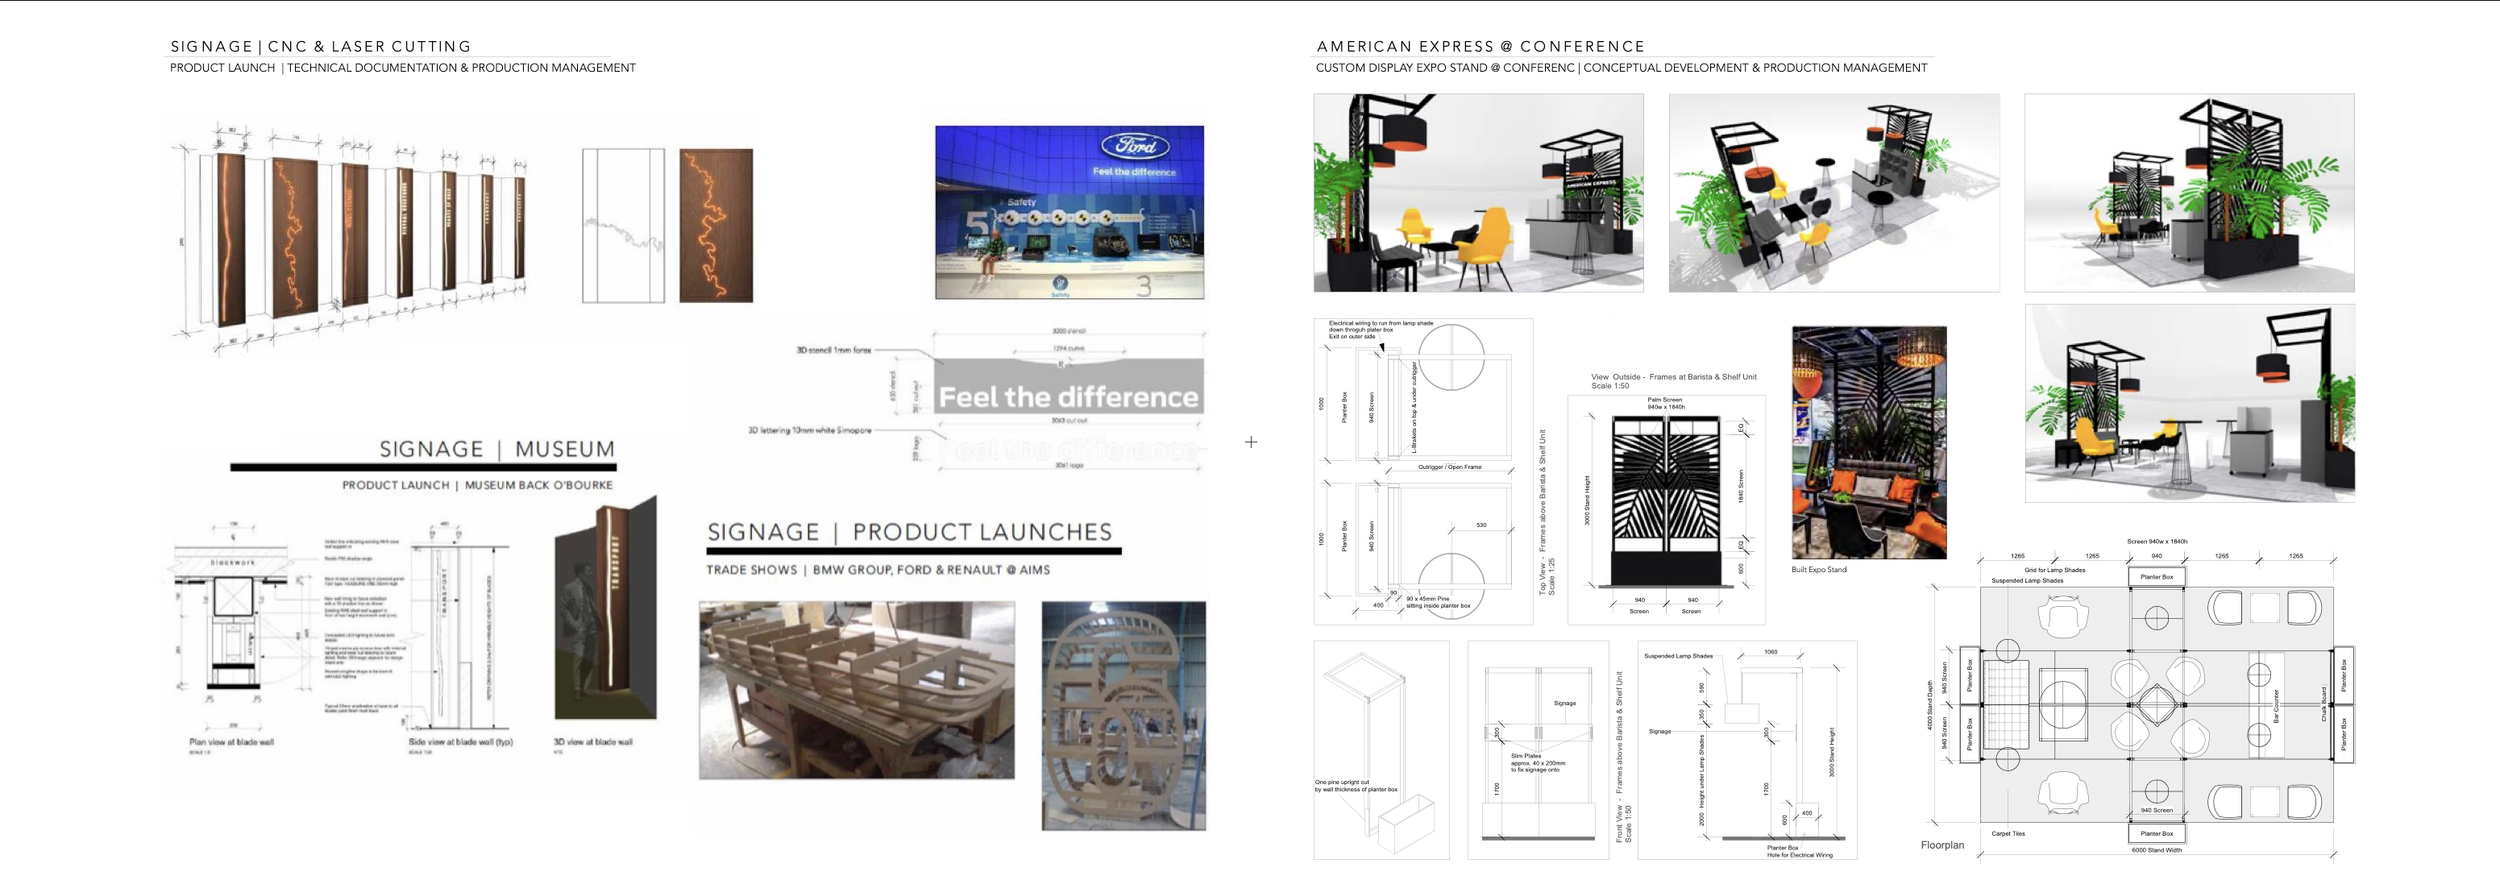 Grethe+Connerth+Twinmotion+Vectorworks+Real Time Visualisations+Archviz+Trade+Show+Expo+Booth+Exhibition+Design+Digital+Banner+Print+Expo+Booth+Gallery+Museum+Retail+Brand+Academy+Commercial+Event+Environment+Displays+Signage+Museum+TradeShow.png